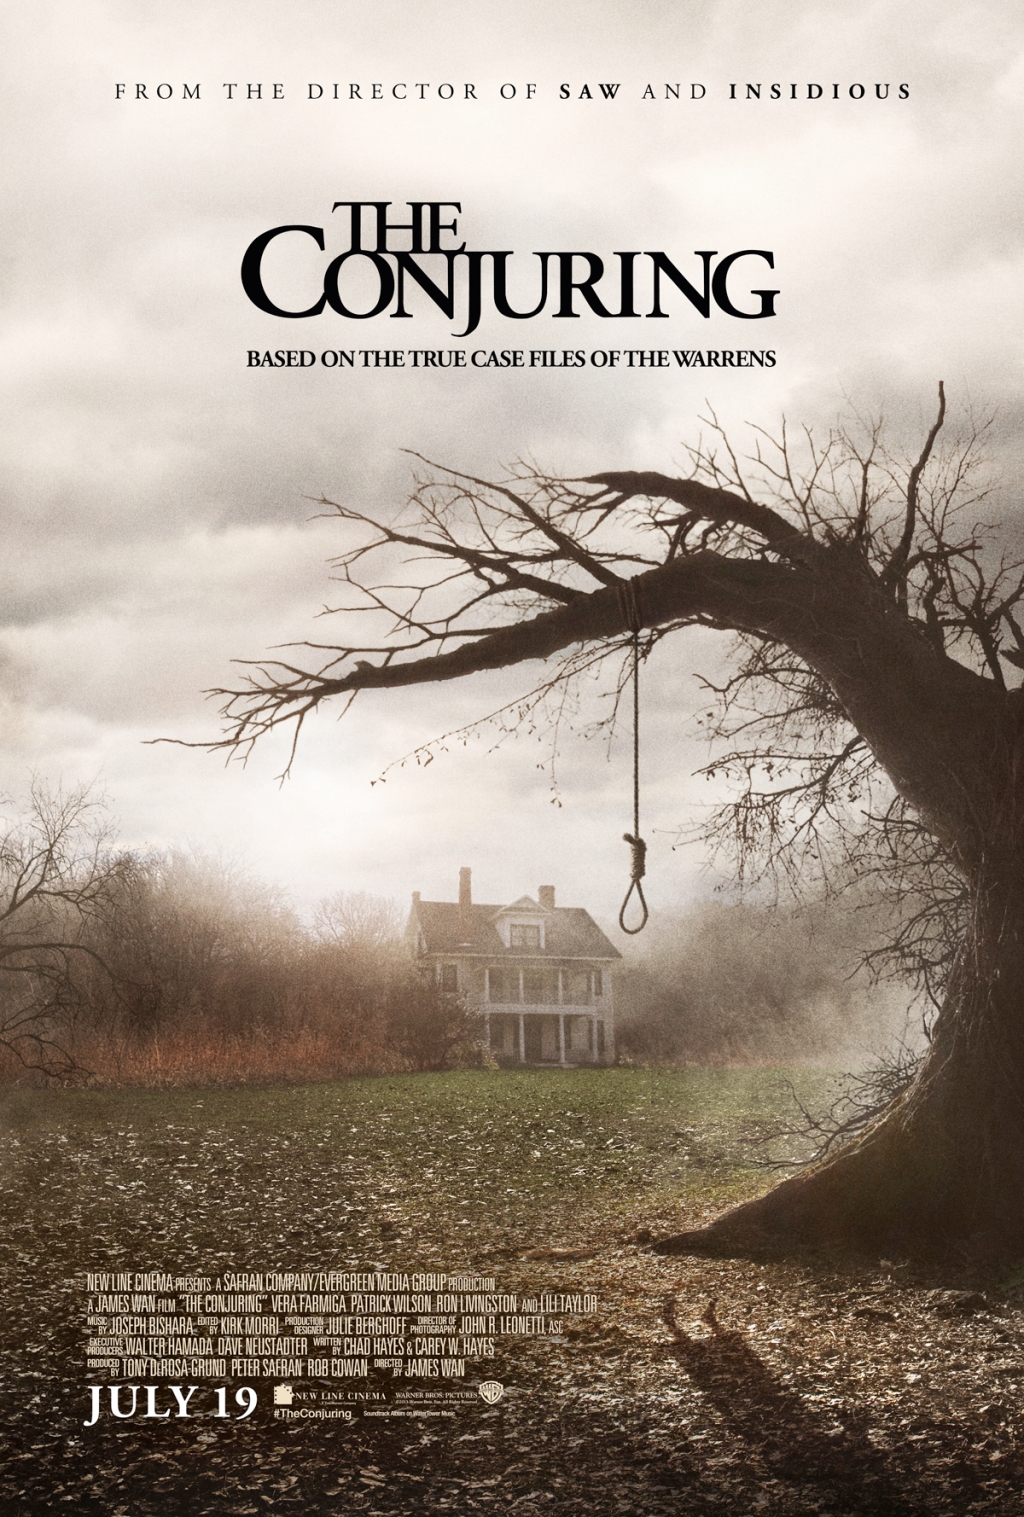 Tremble Ep 182: The Conjuring